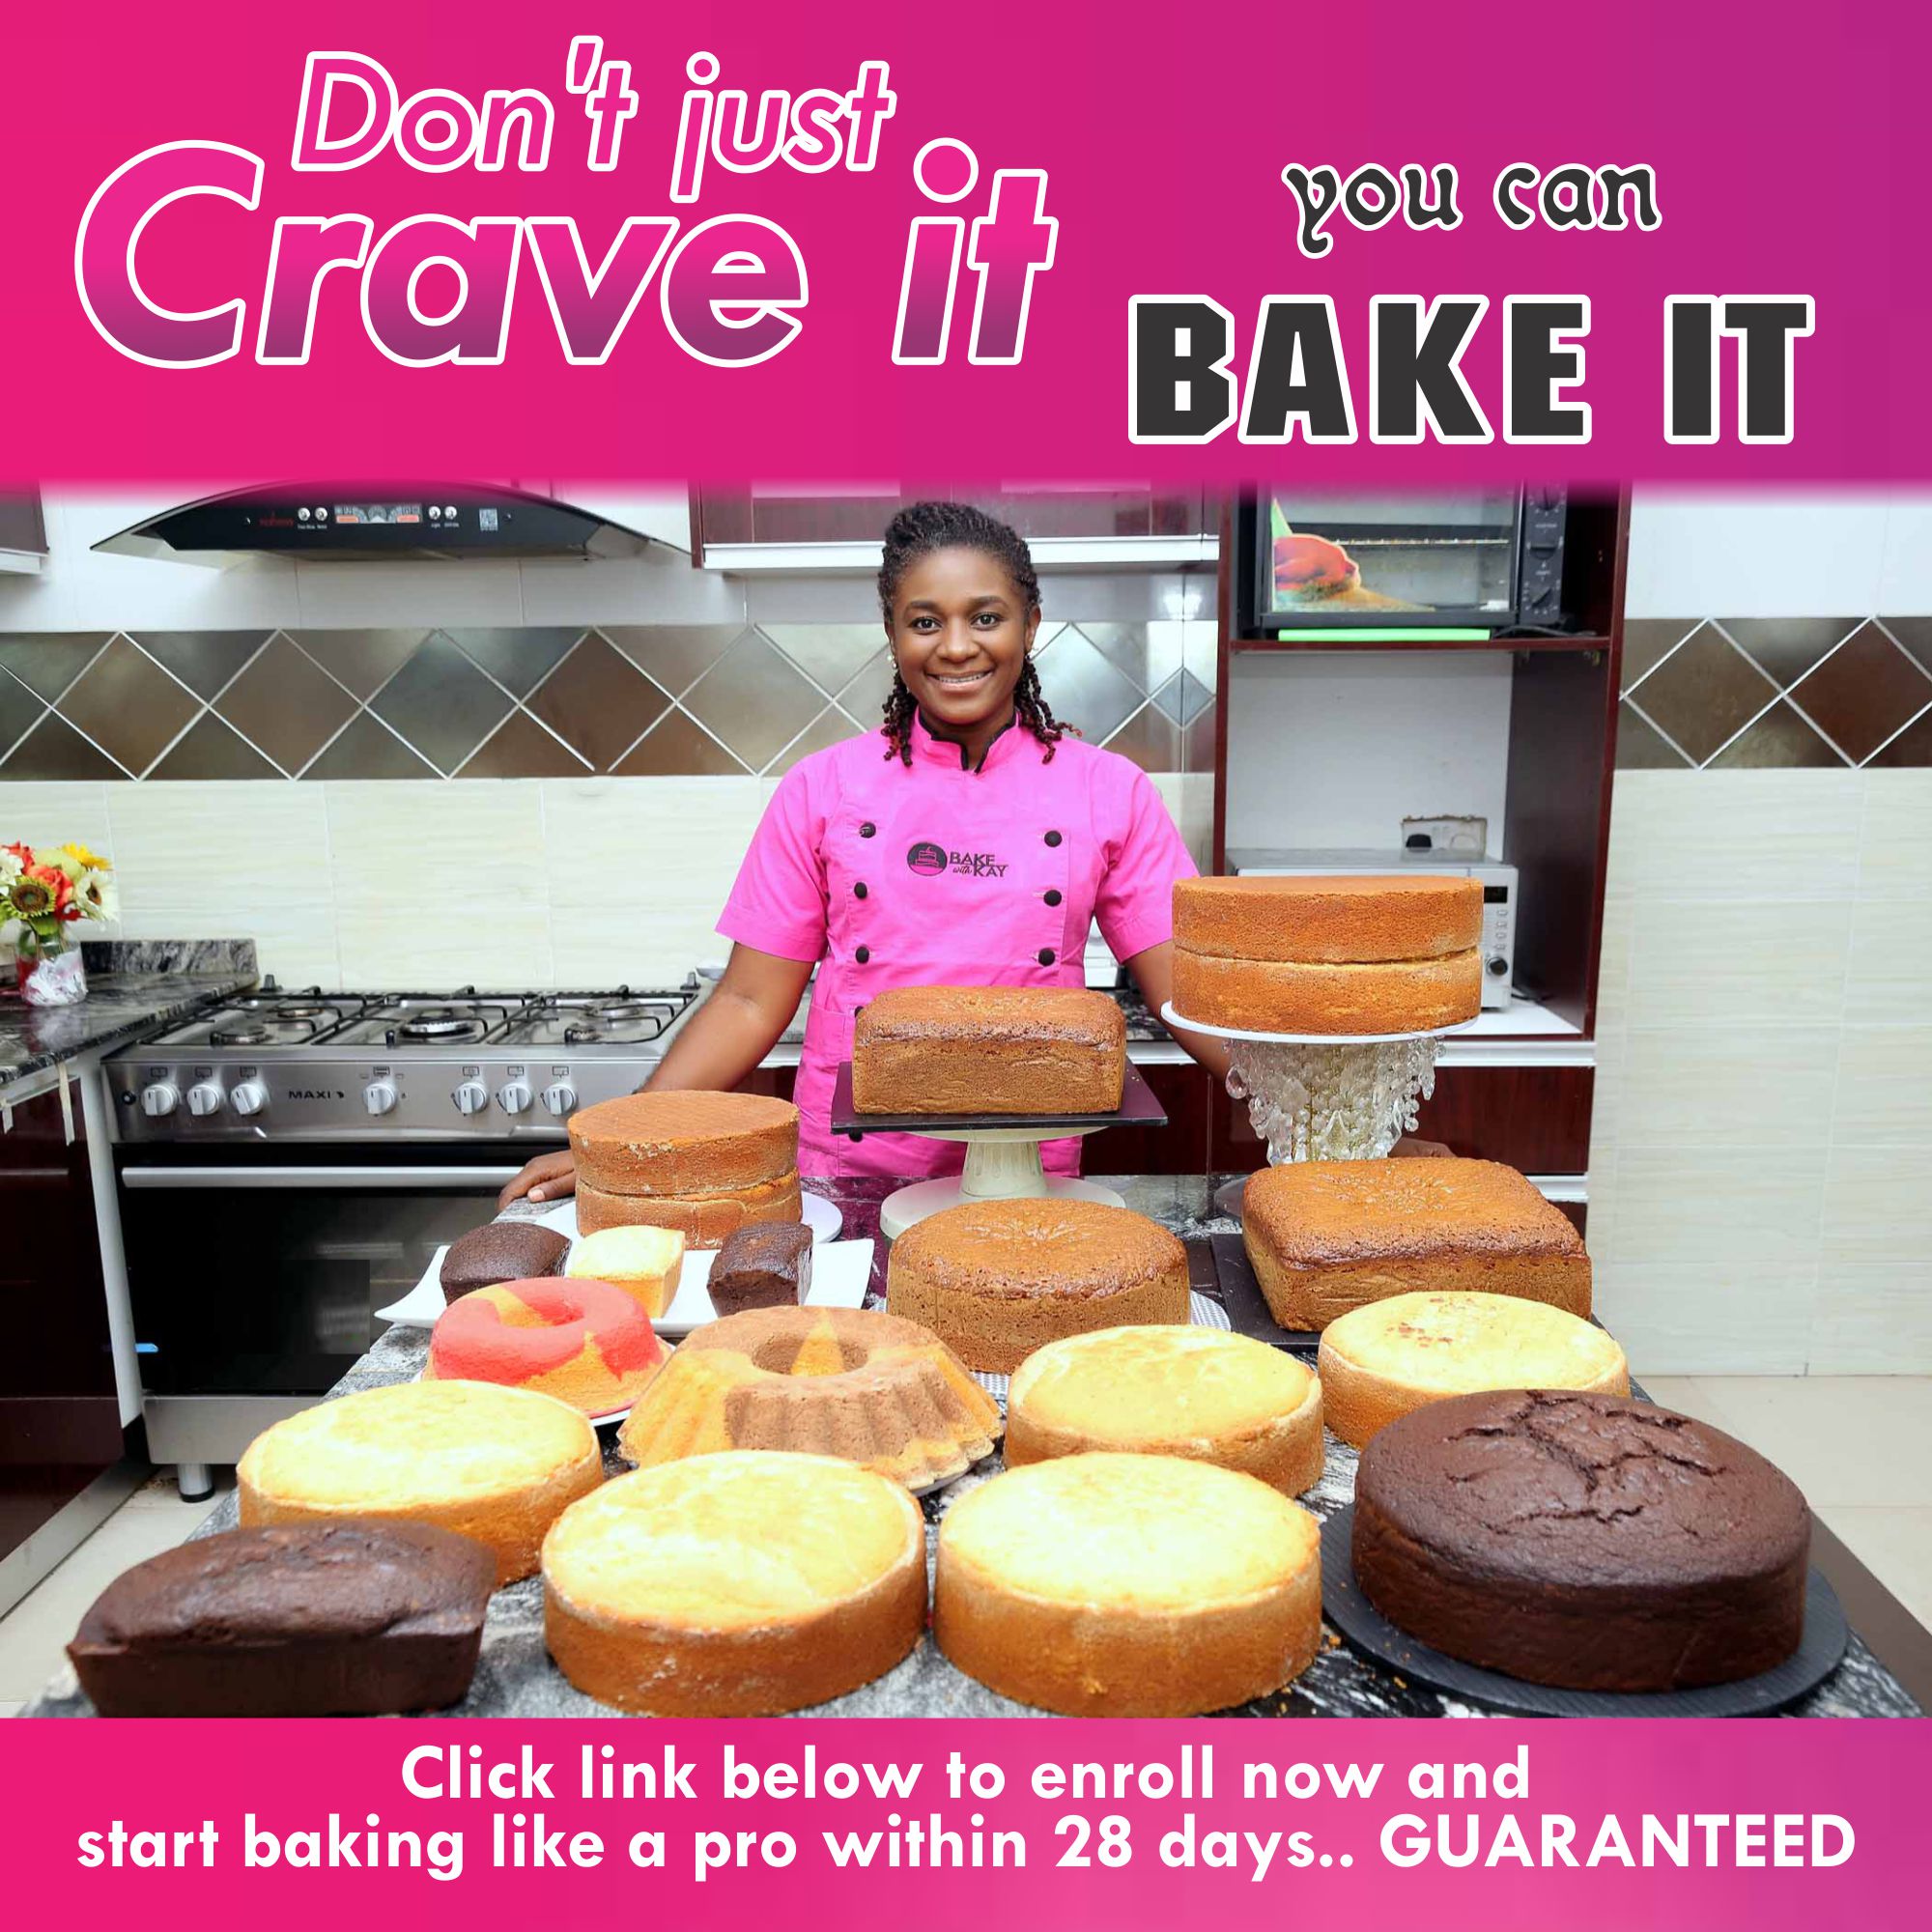 Bake it and crave it